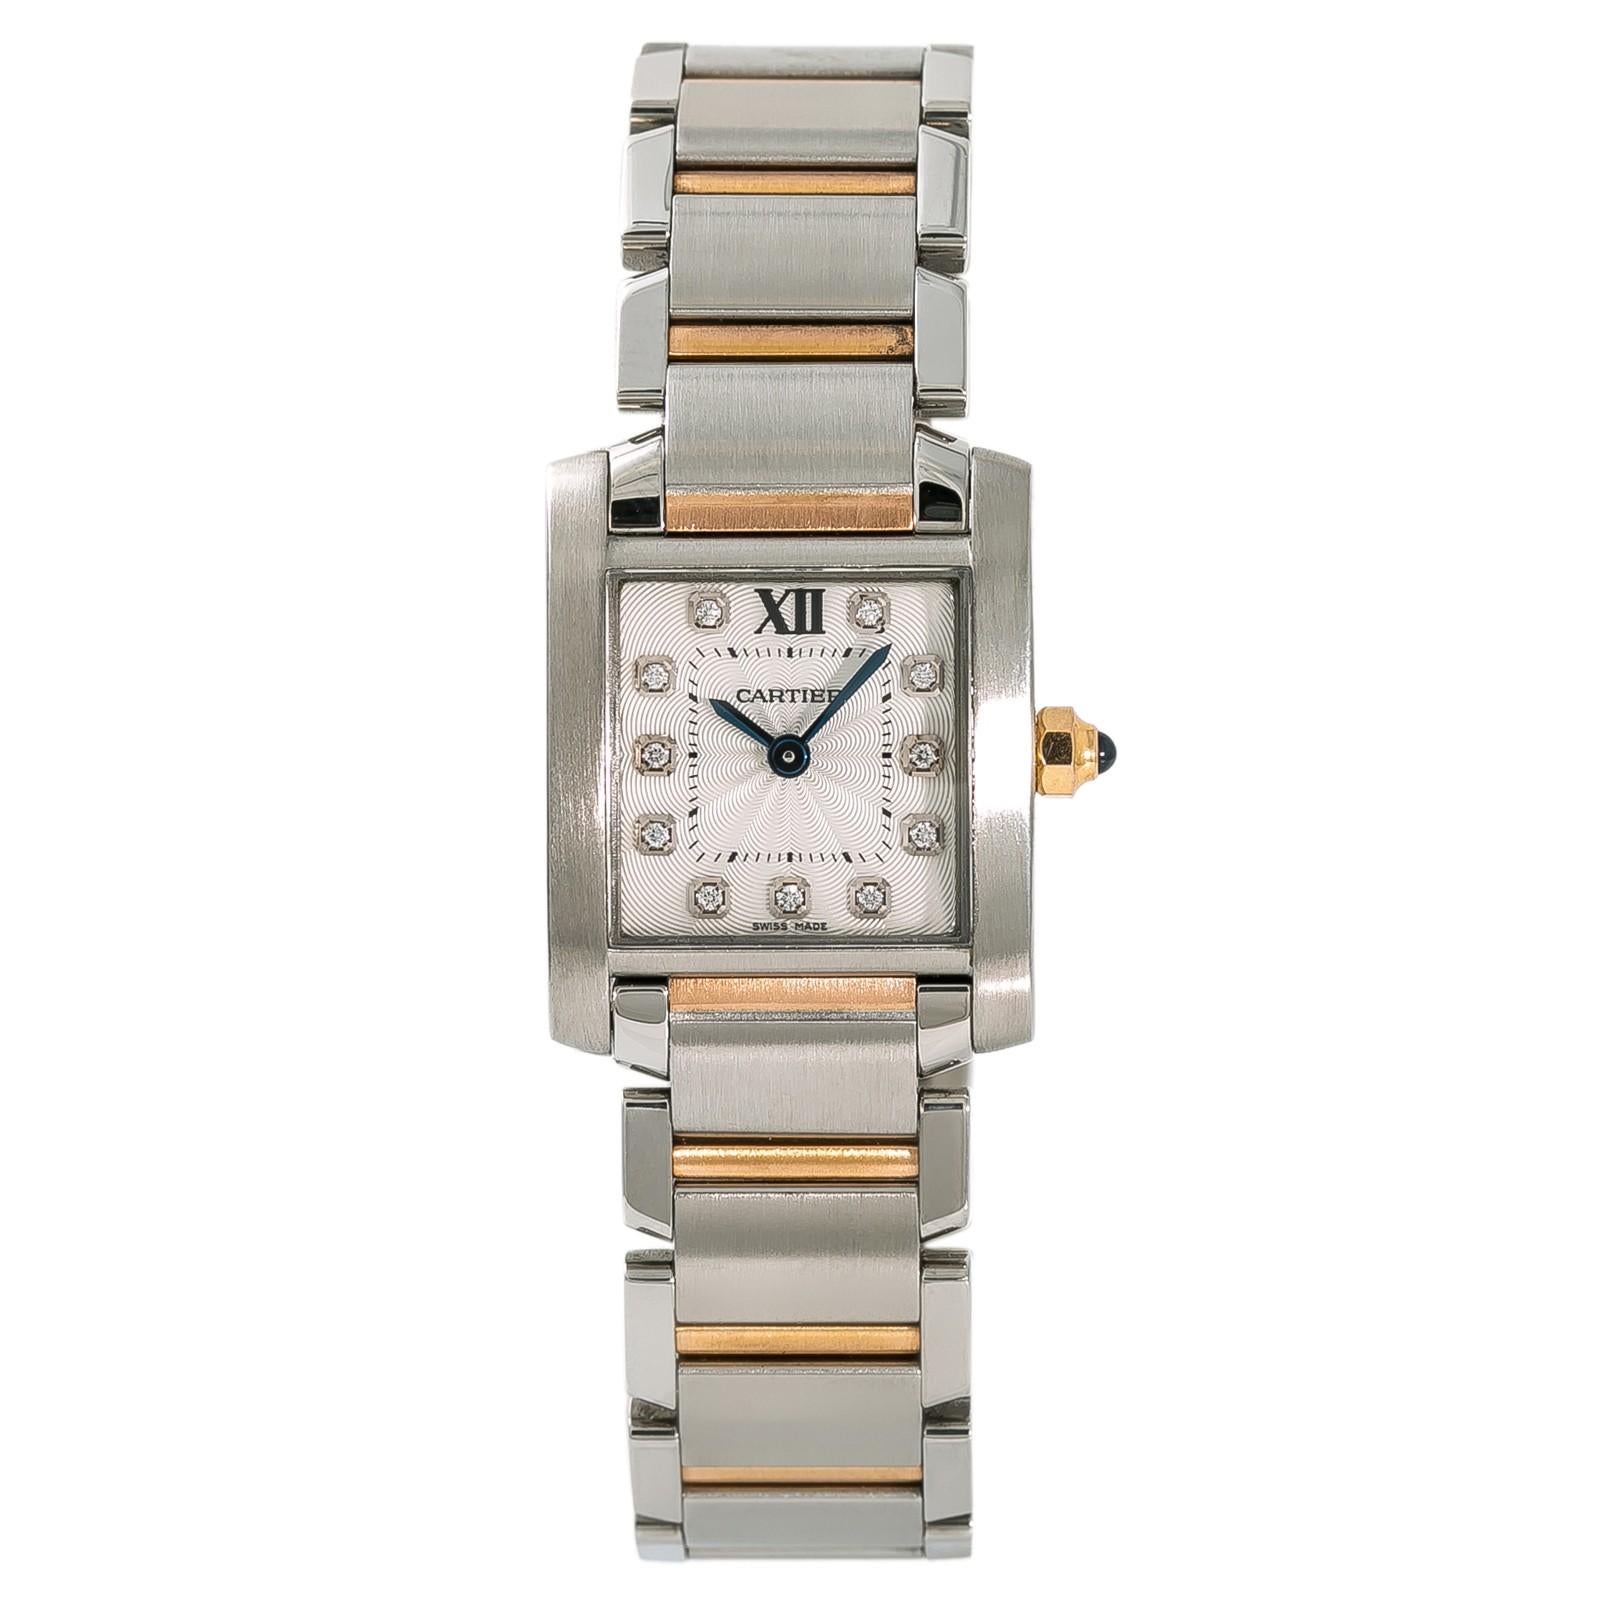 Cartier Tank Francaise5520, Dial Certified Authentic For Sale